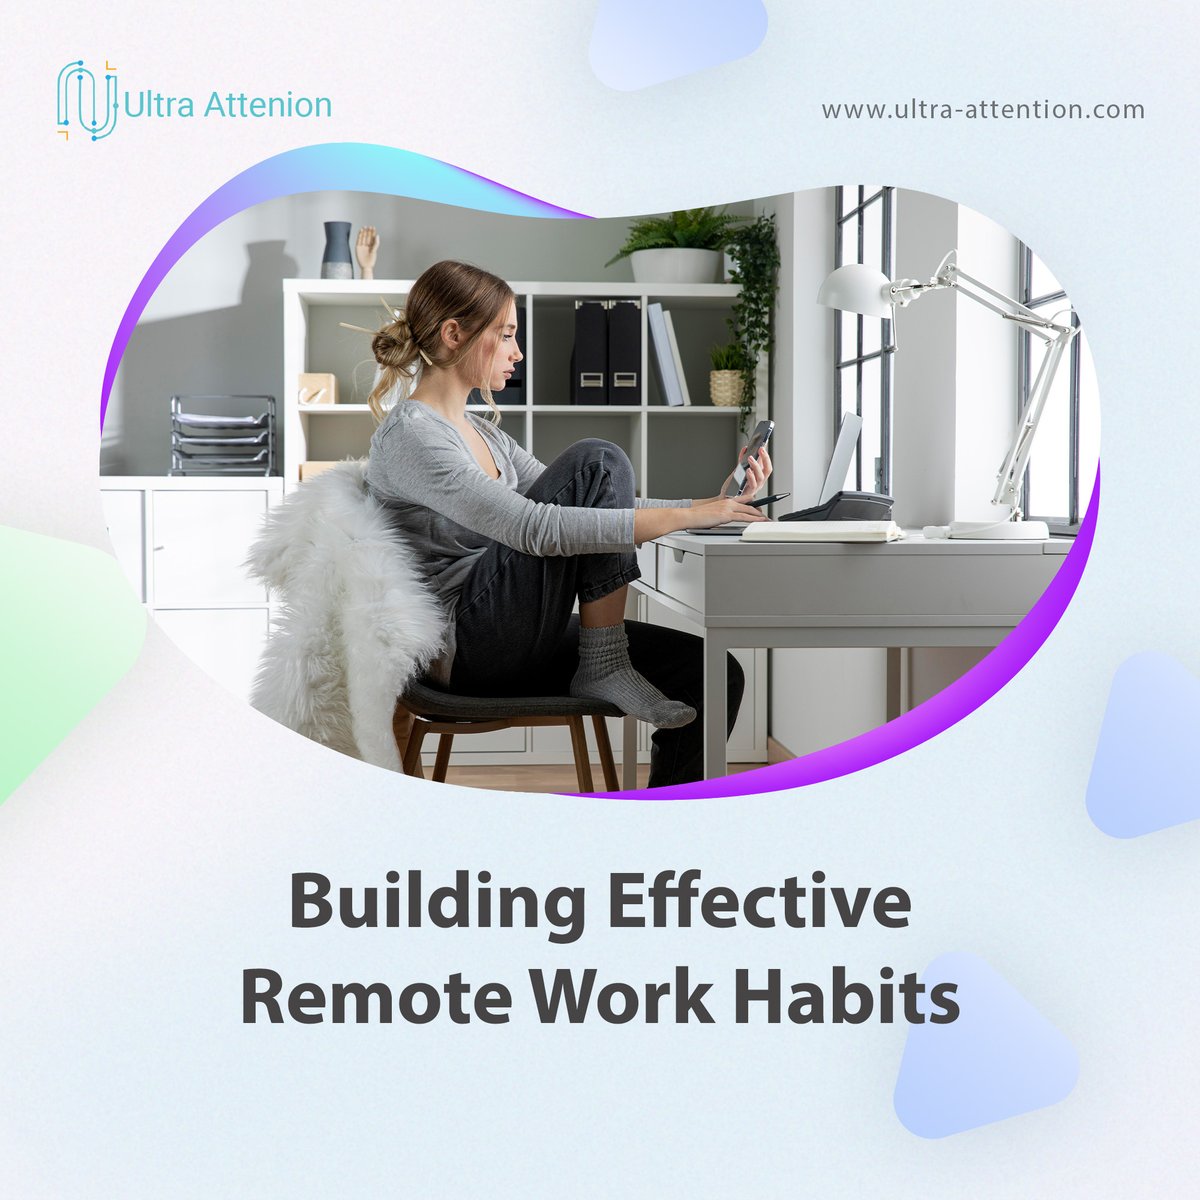 Remote work brings benefits but needs #skills and #habits. Plan time, set #workspace, control #distractions, stay updated; be focused, creative, and productive while working remotely.

#focus #workhabits #productivity #freelancers